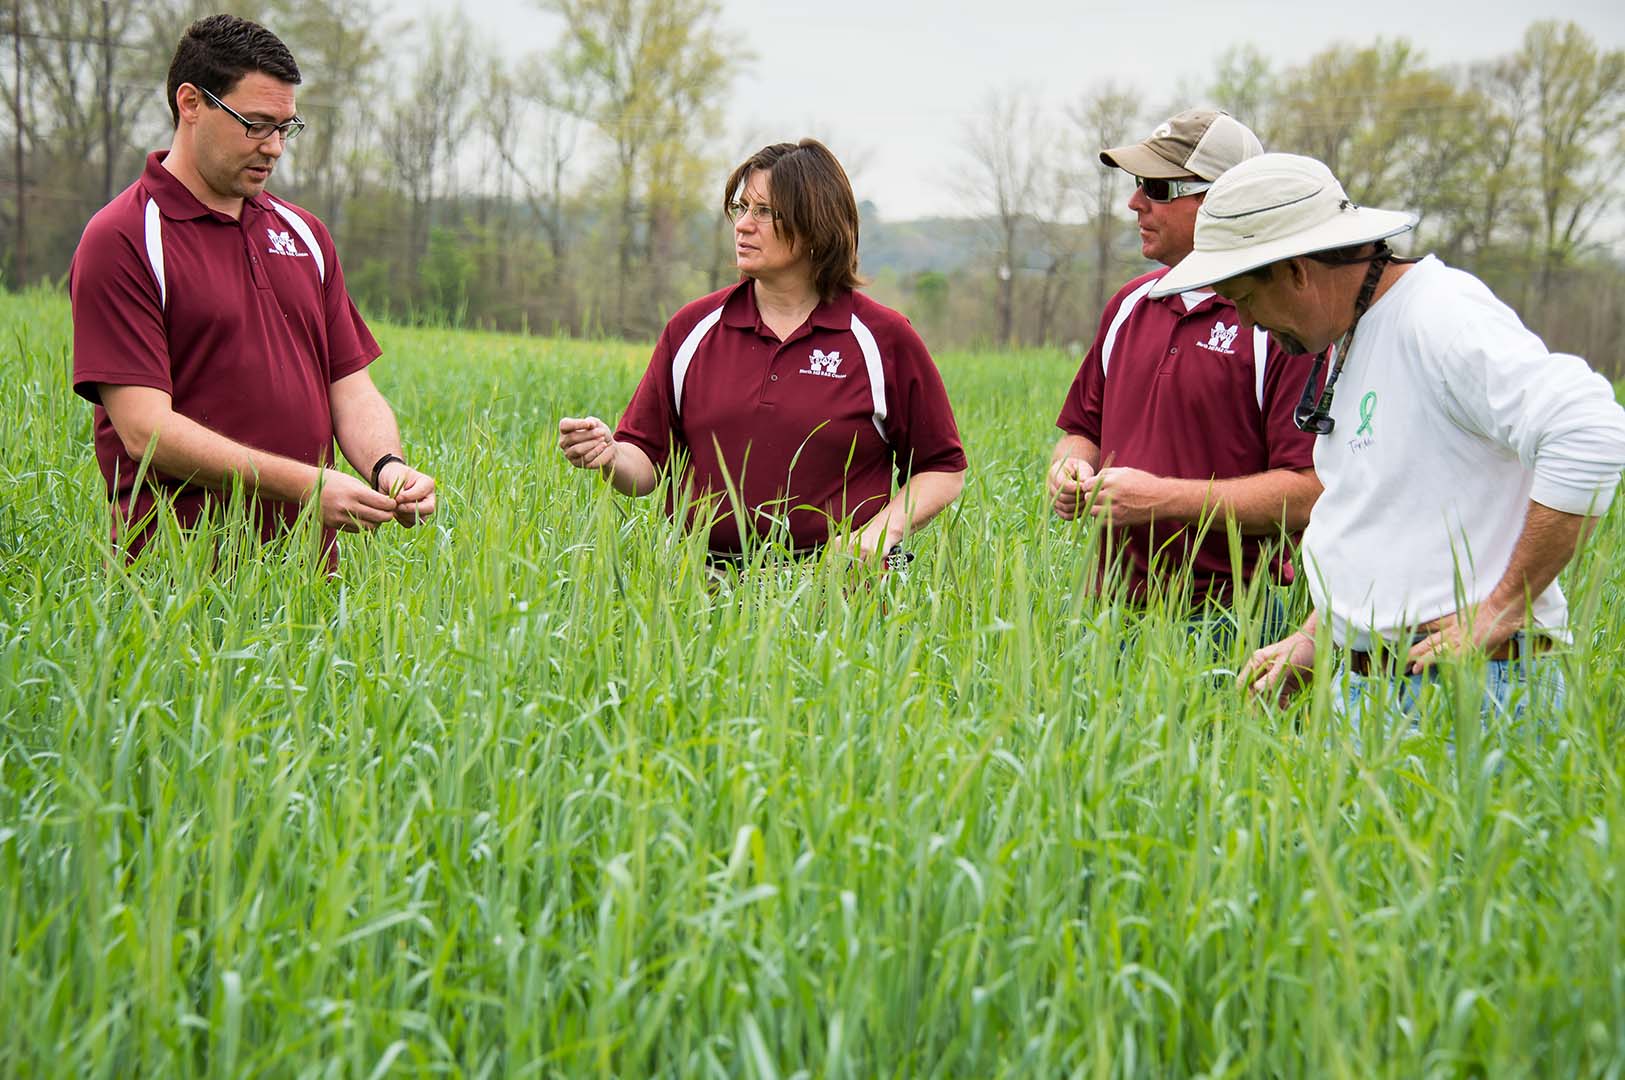 Dr. Casey Barickman; Susan Worthy, research associate III; Cameron Tate, research technician; and Thomas Horgan, senior research associate, examine a cereal rye research plot at the Northeast Mississippi Branch Experiment Station in Verona, Mississippi. (Photo by Dominque Belcher)